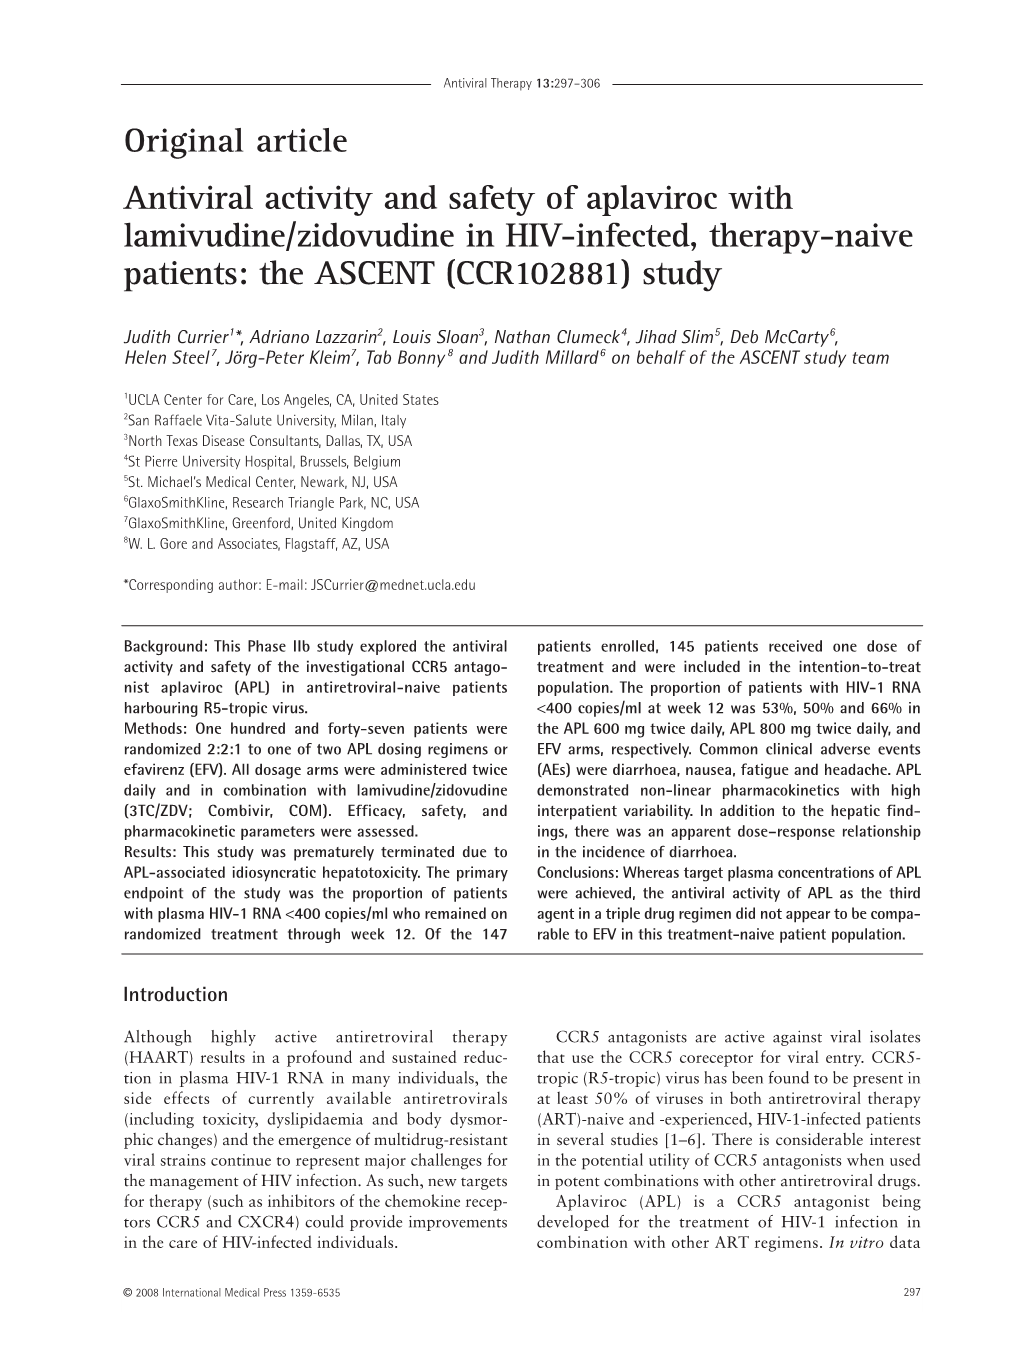 Antiviral Activity and Safety of Aplaviroc with Lamivudine/Zidovudine in HIV-Infected, Therapy-Naive Patients: the ASCENT (CCR102881) Study